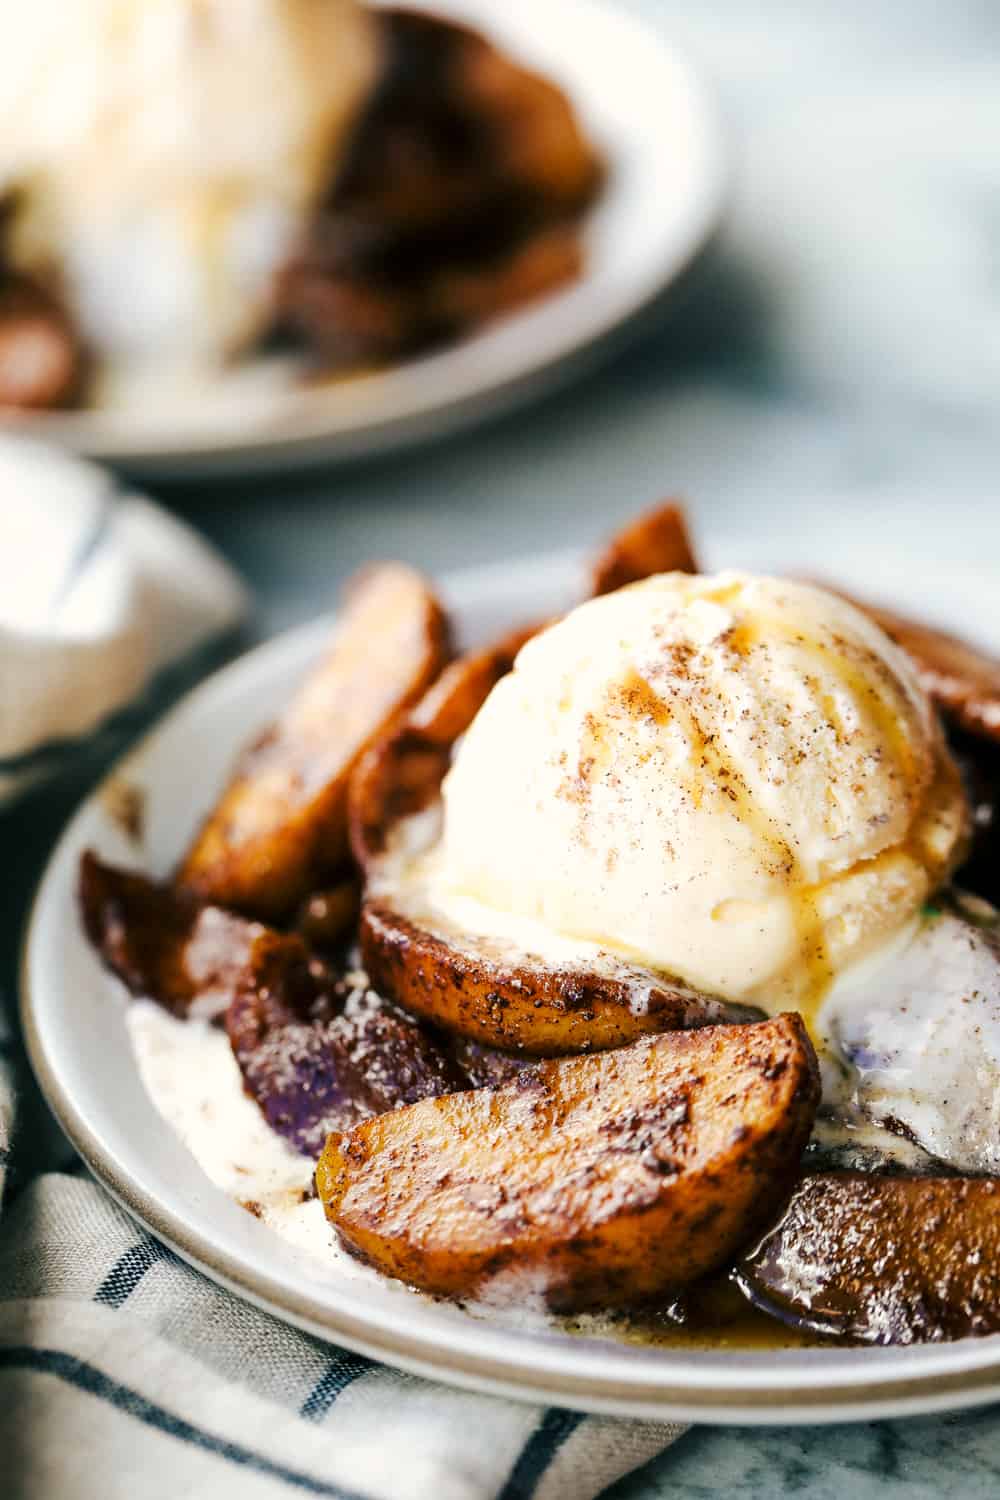 brown sugar cinnamon baked apples with ice cream on top.